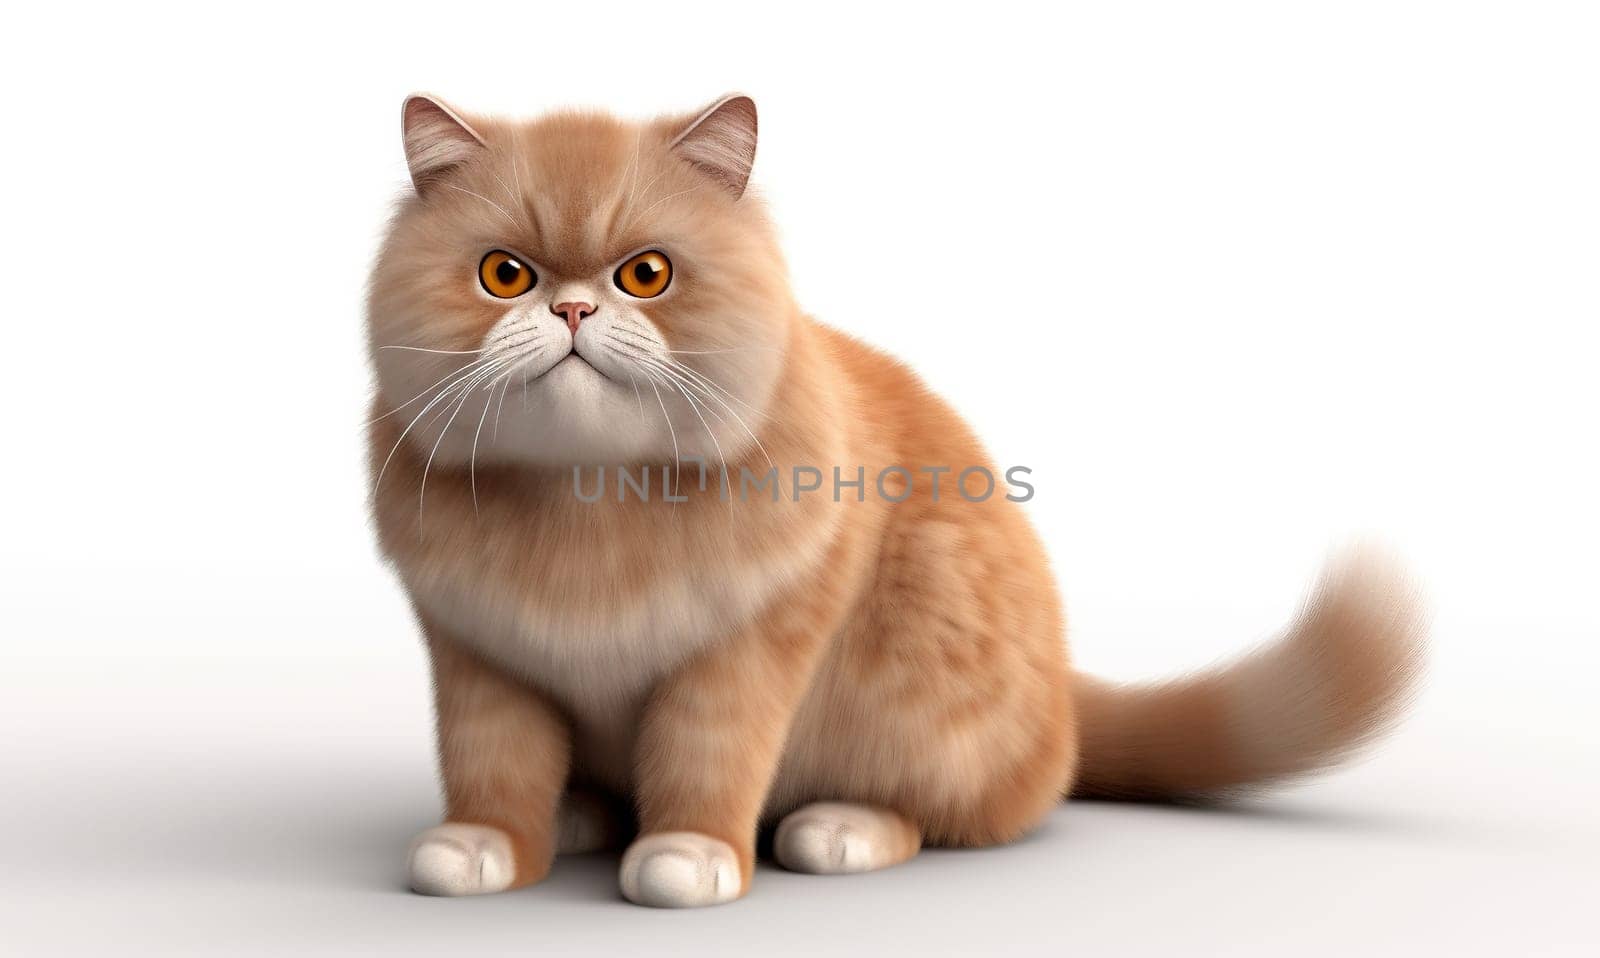 Illustration Of A Red British Shorthair Breed Cat On A White Background